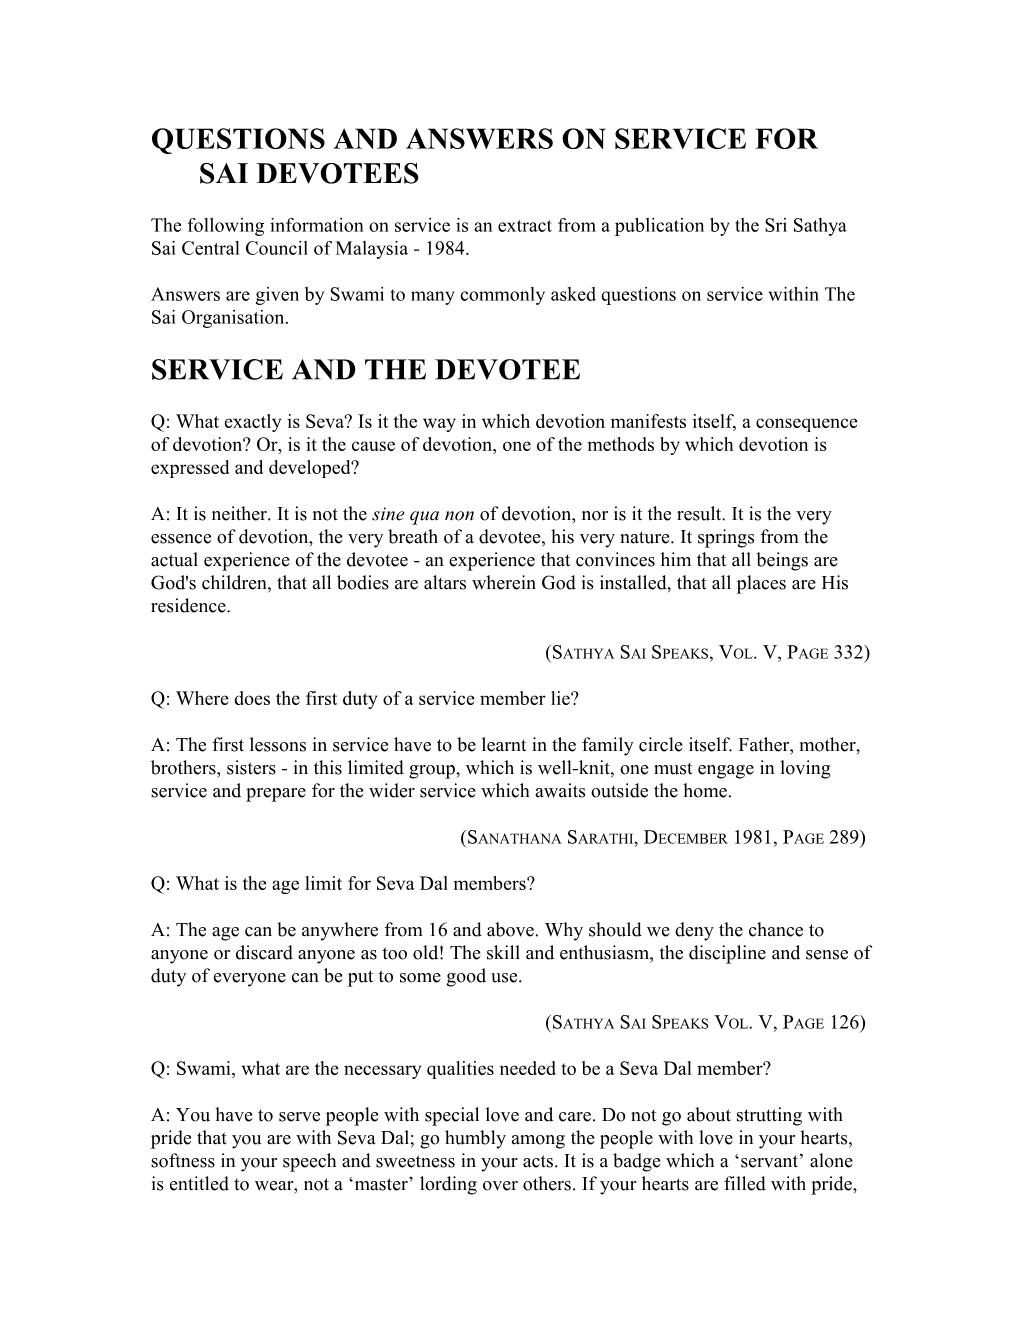 Questions and Answers on Service for Sai Devotees